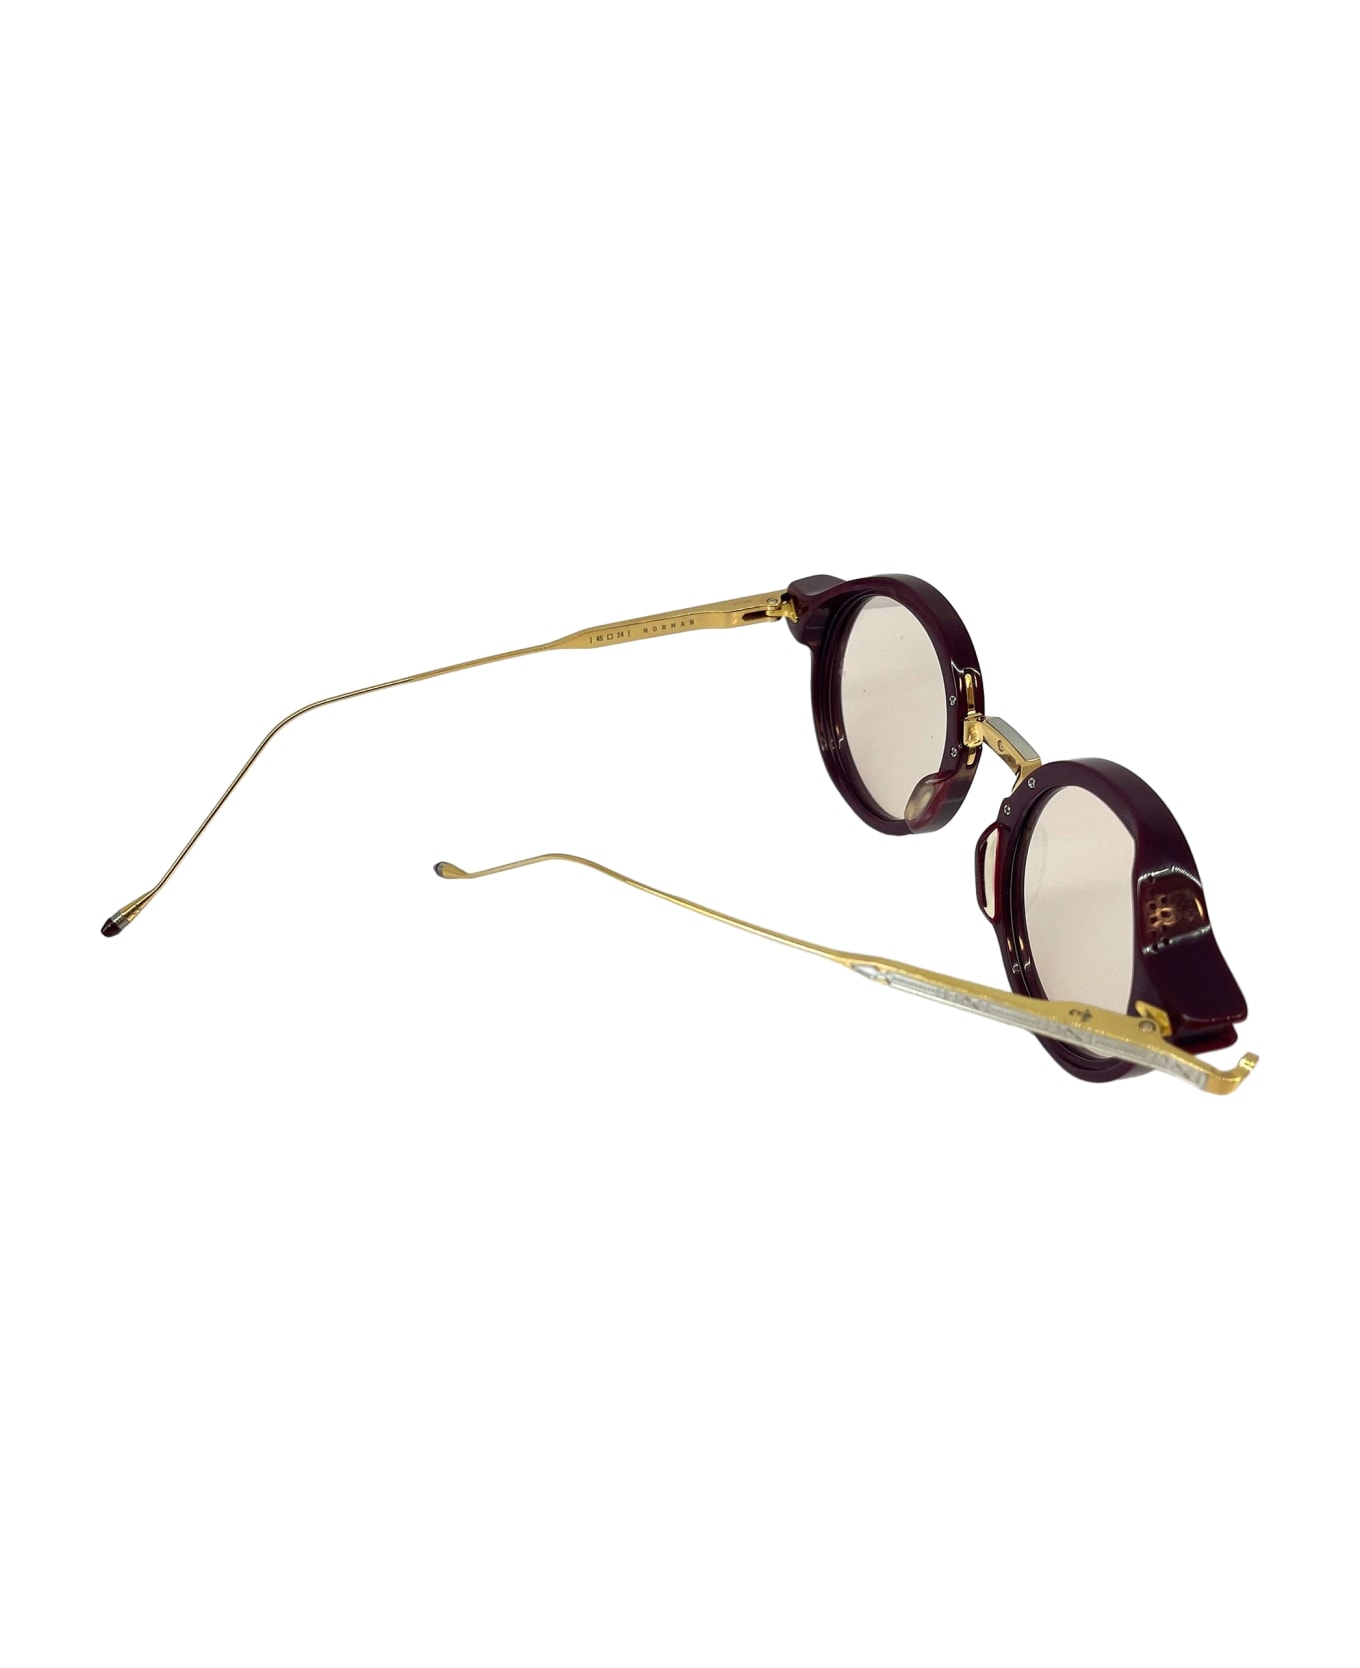 Jacques Marie Mage Norman - Reserve Rx Glasses - burgundy